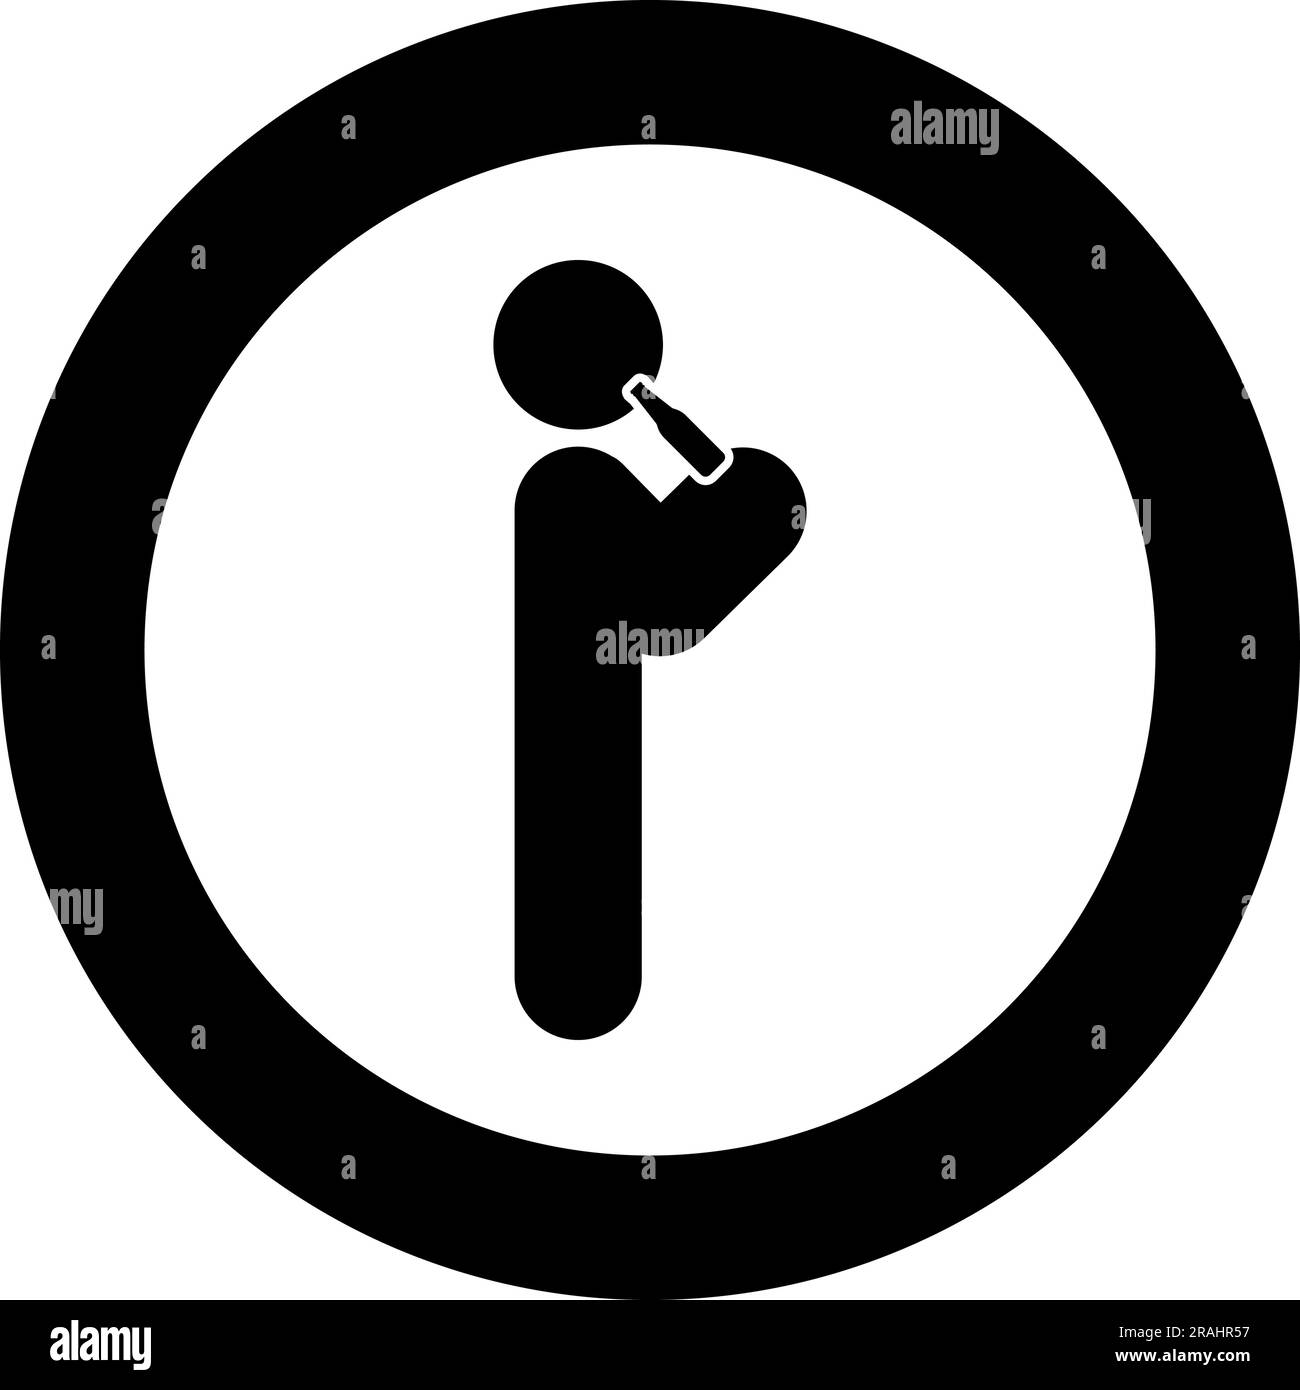 Man human drinking water alcohol beer from bottle standing position icon in circle round black color vector illustration image solid outline style Stock Vector